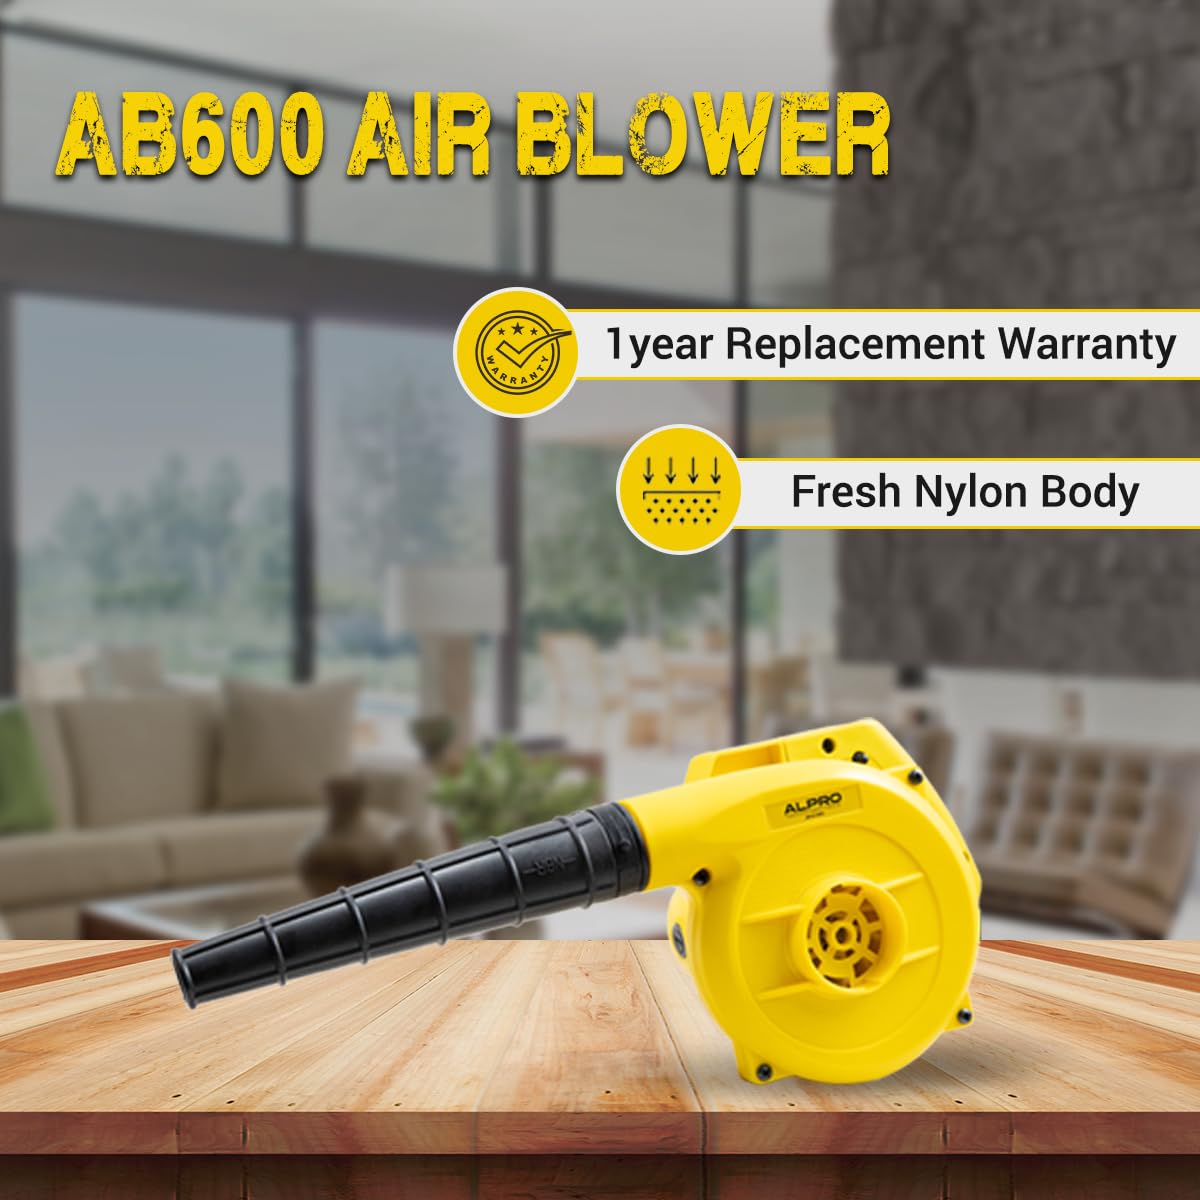 ALPRO AB600 Electric Air Blower 600W Heavy-Duty Variable Speed Blower for Home, Office, Car, Dust Cleaning